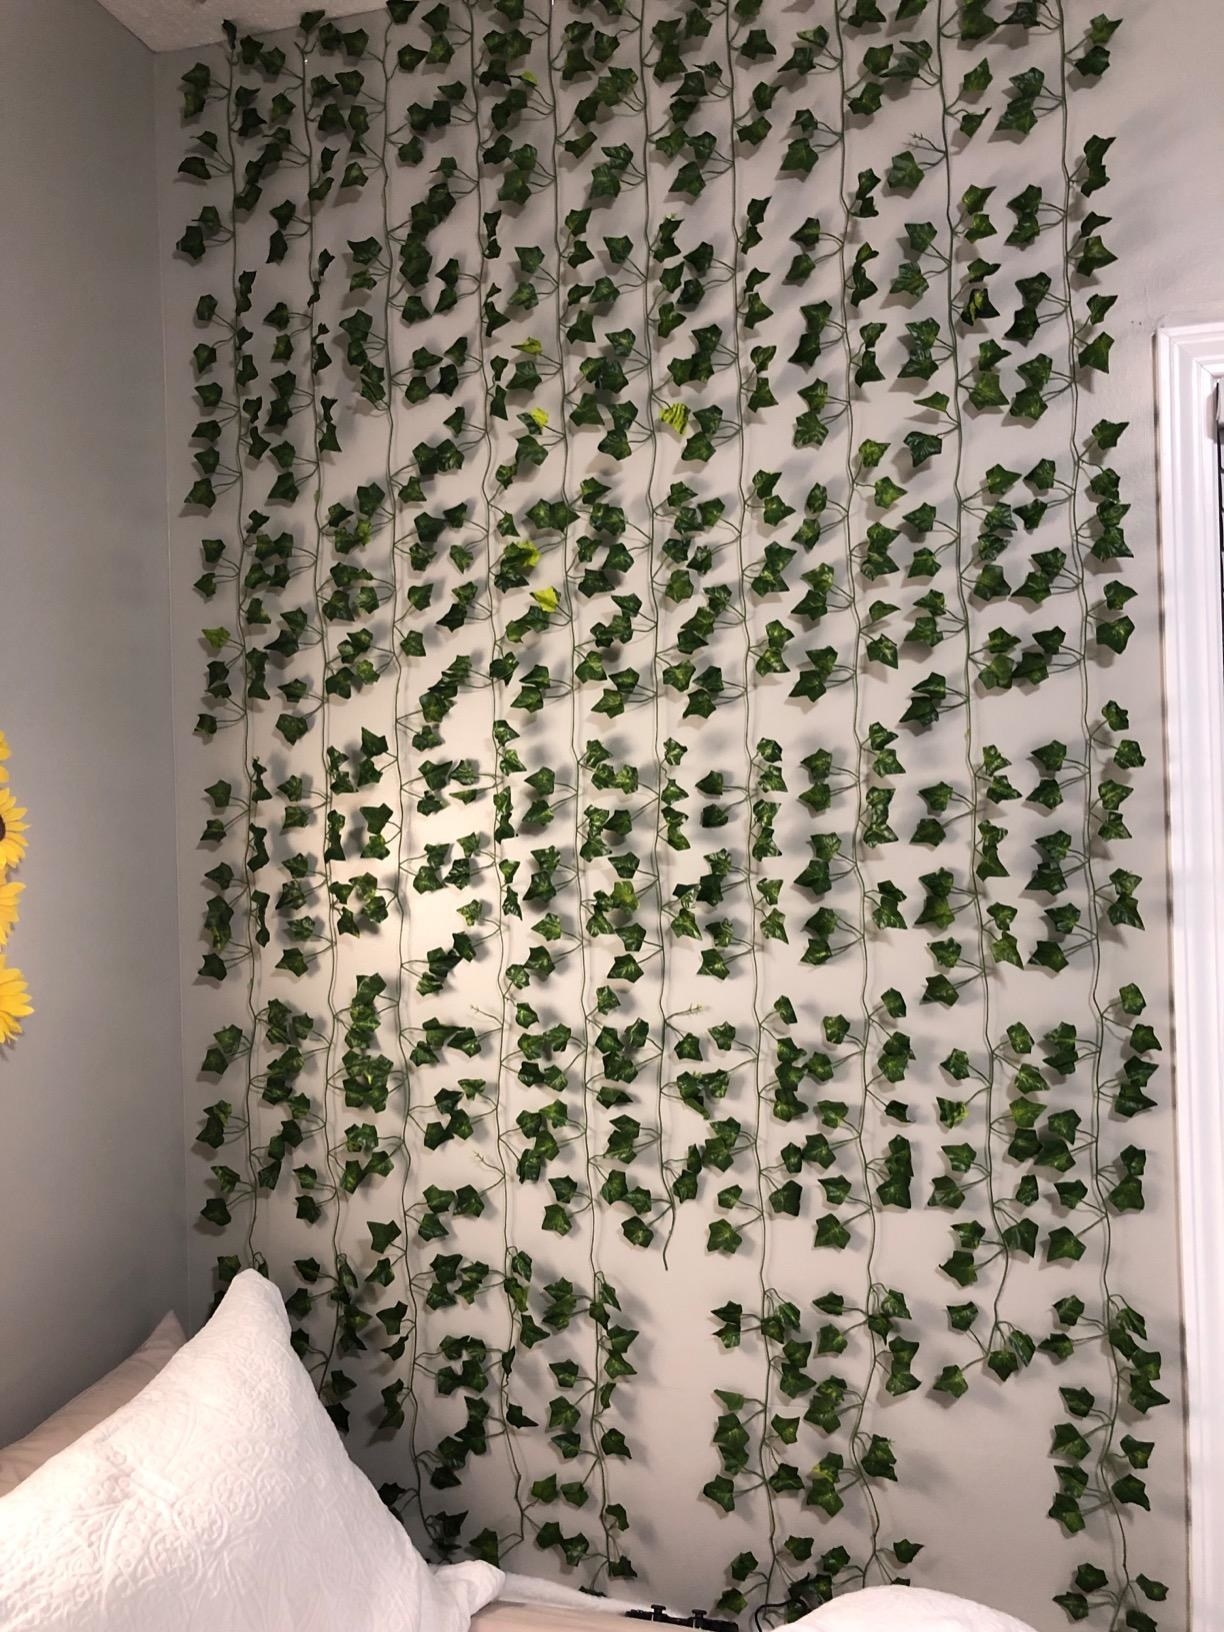 reviewer with the vines hanging on the wall next to their bed 